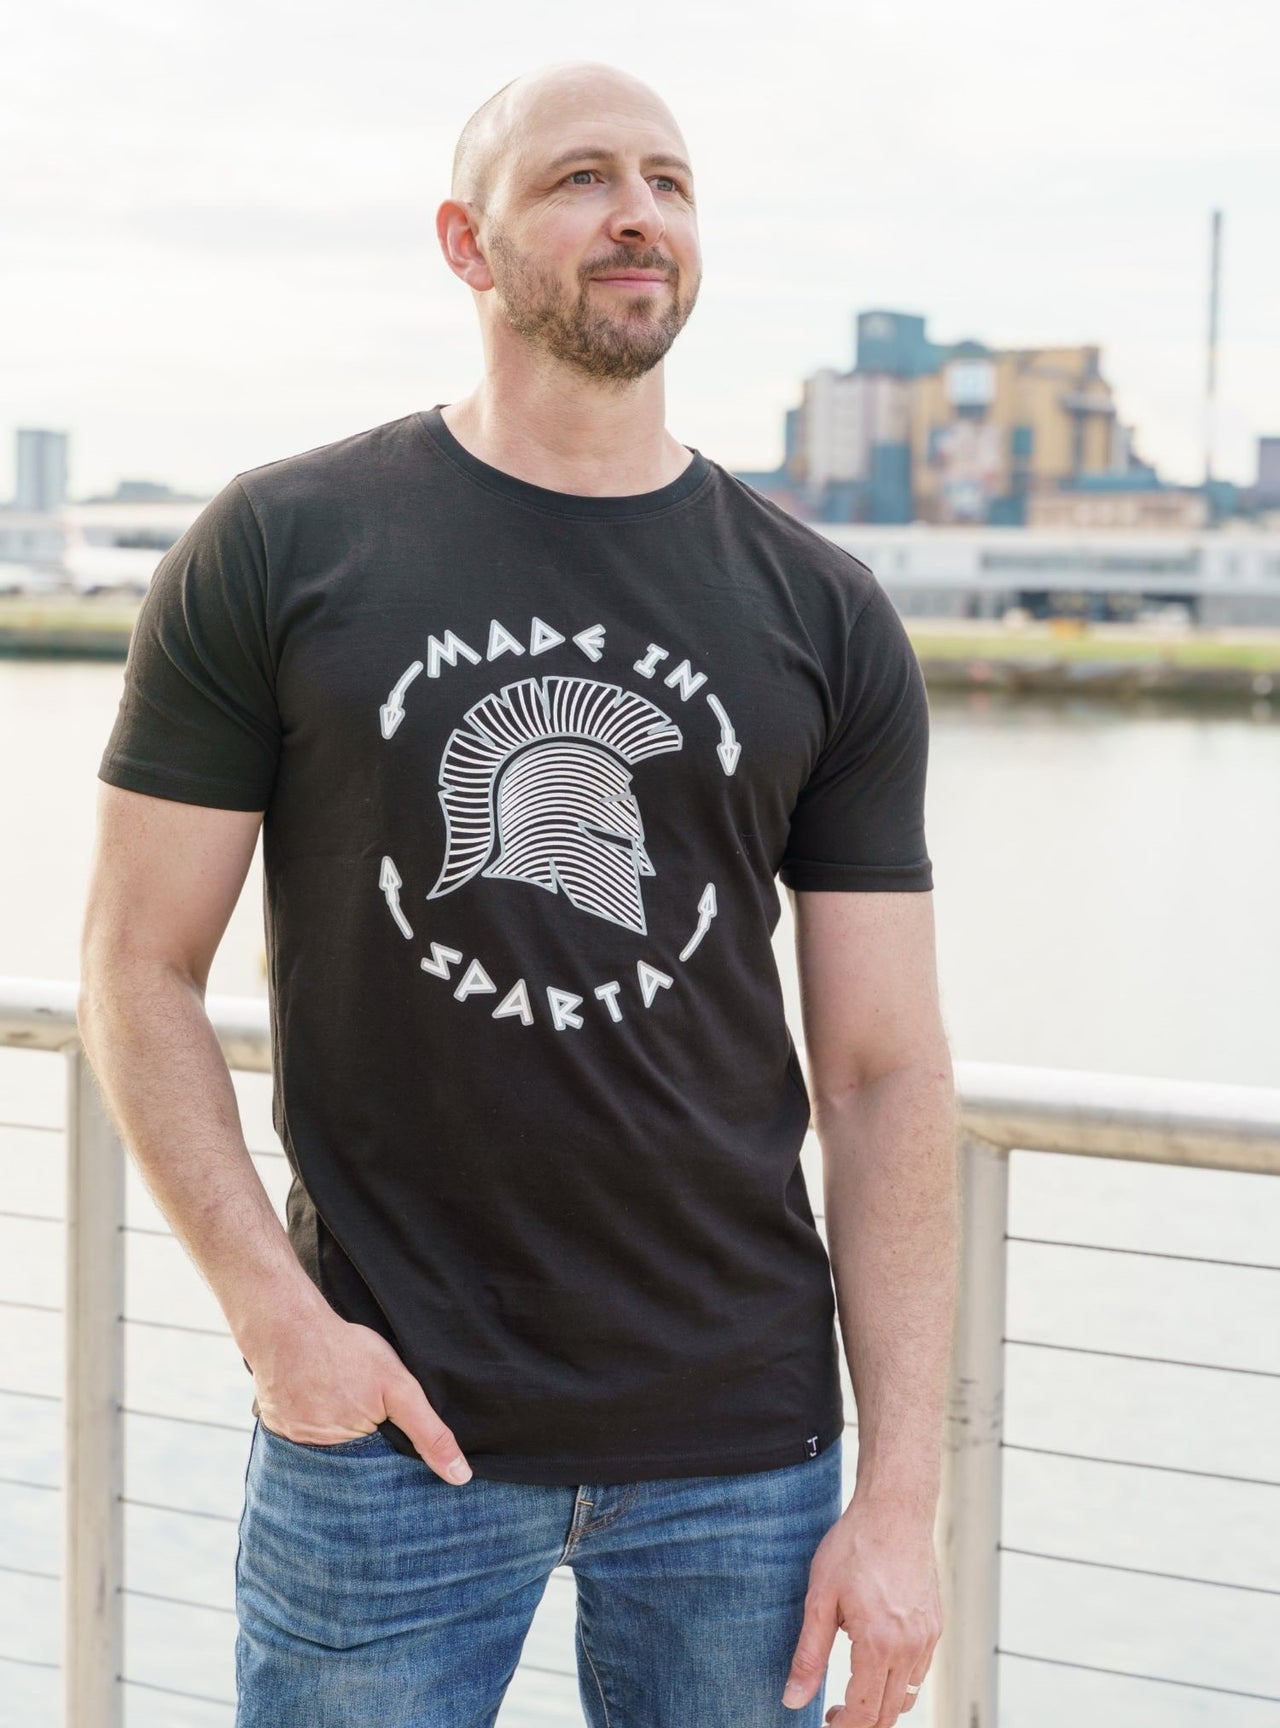 A tall skinny guy wearing a sparta tall graphic t-shirt